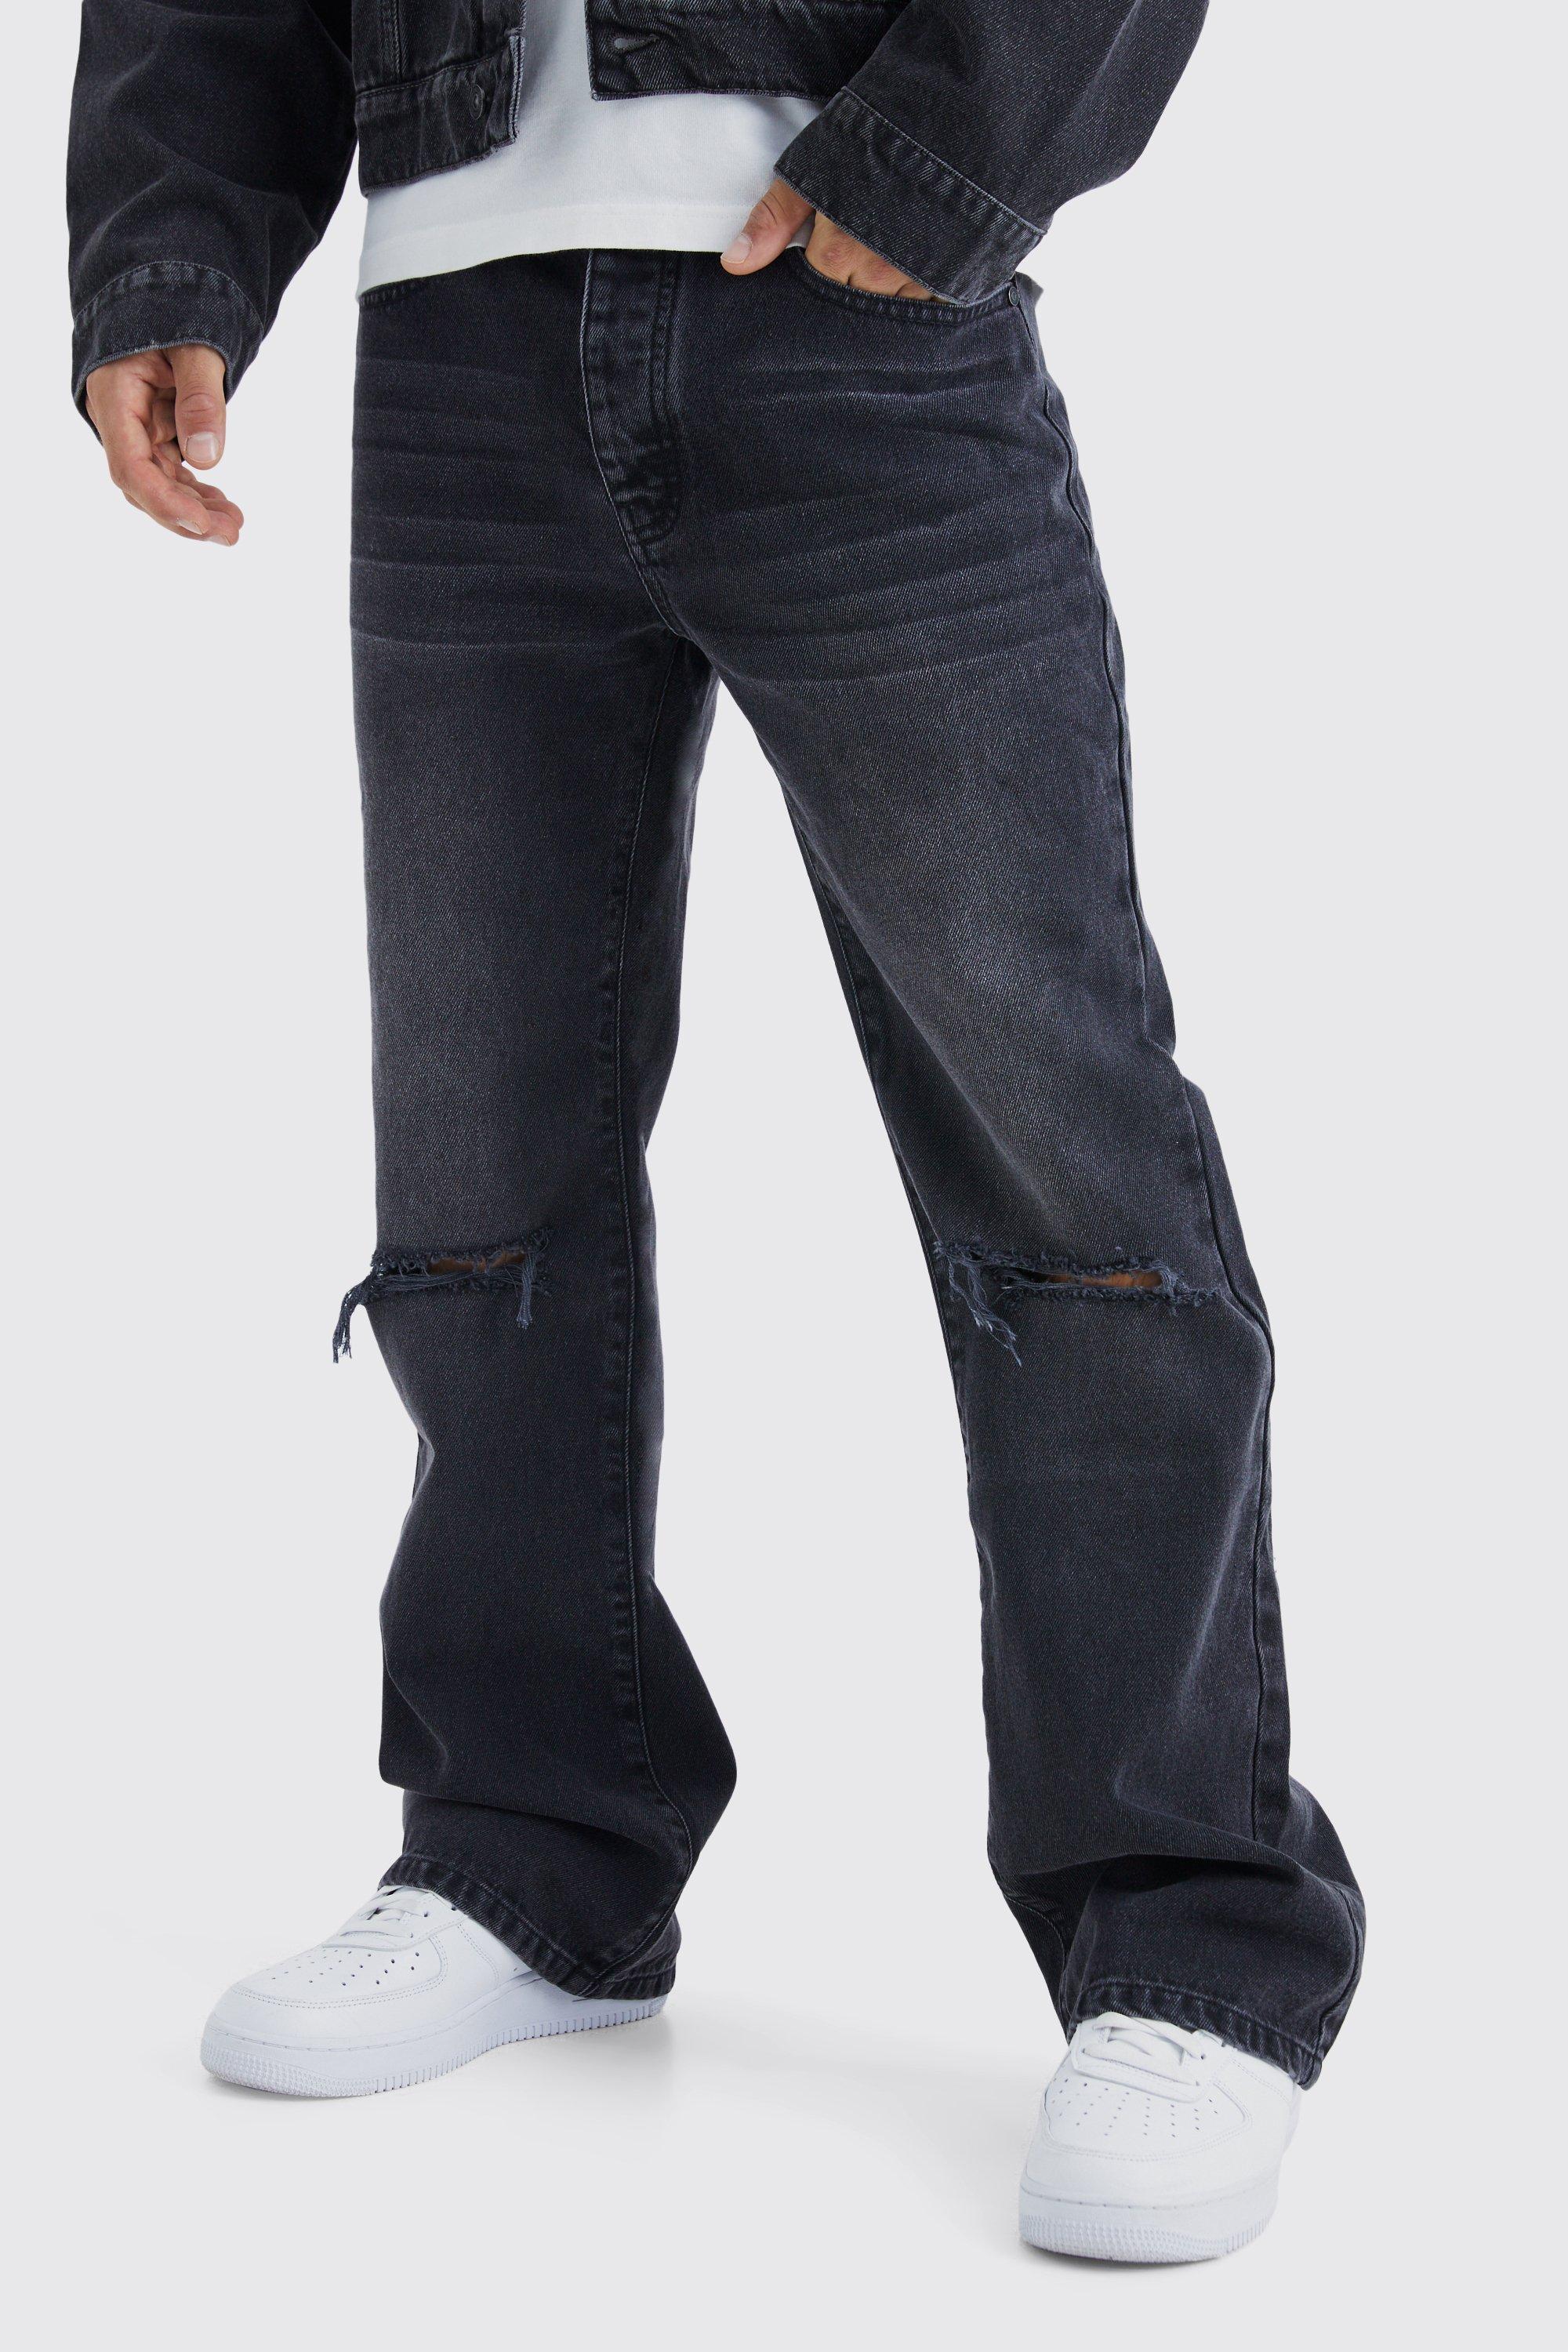 Mens Black Relaxed Rigid Flare Jean With Knee Rips, Black